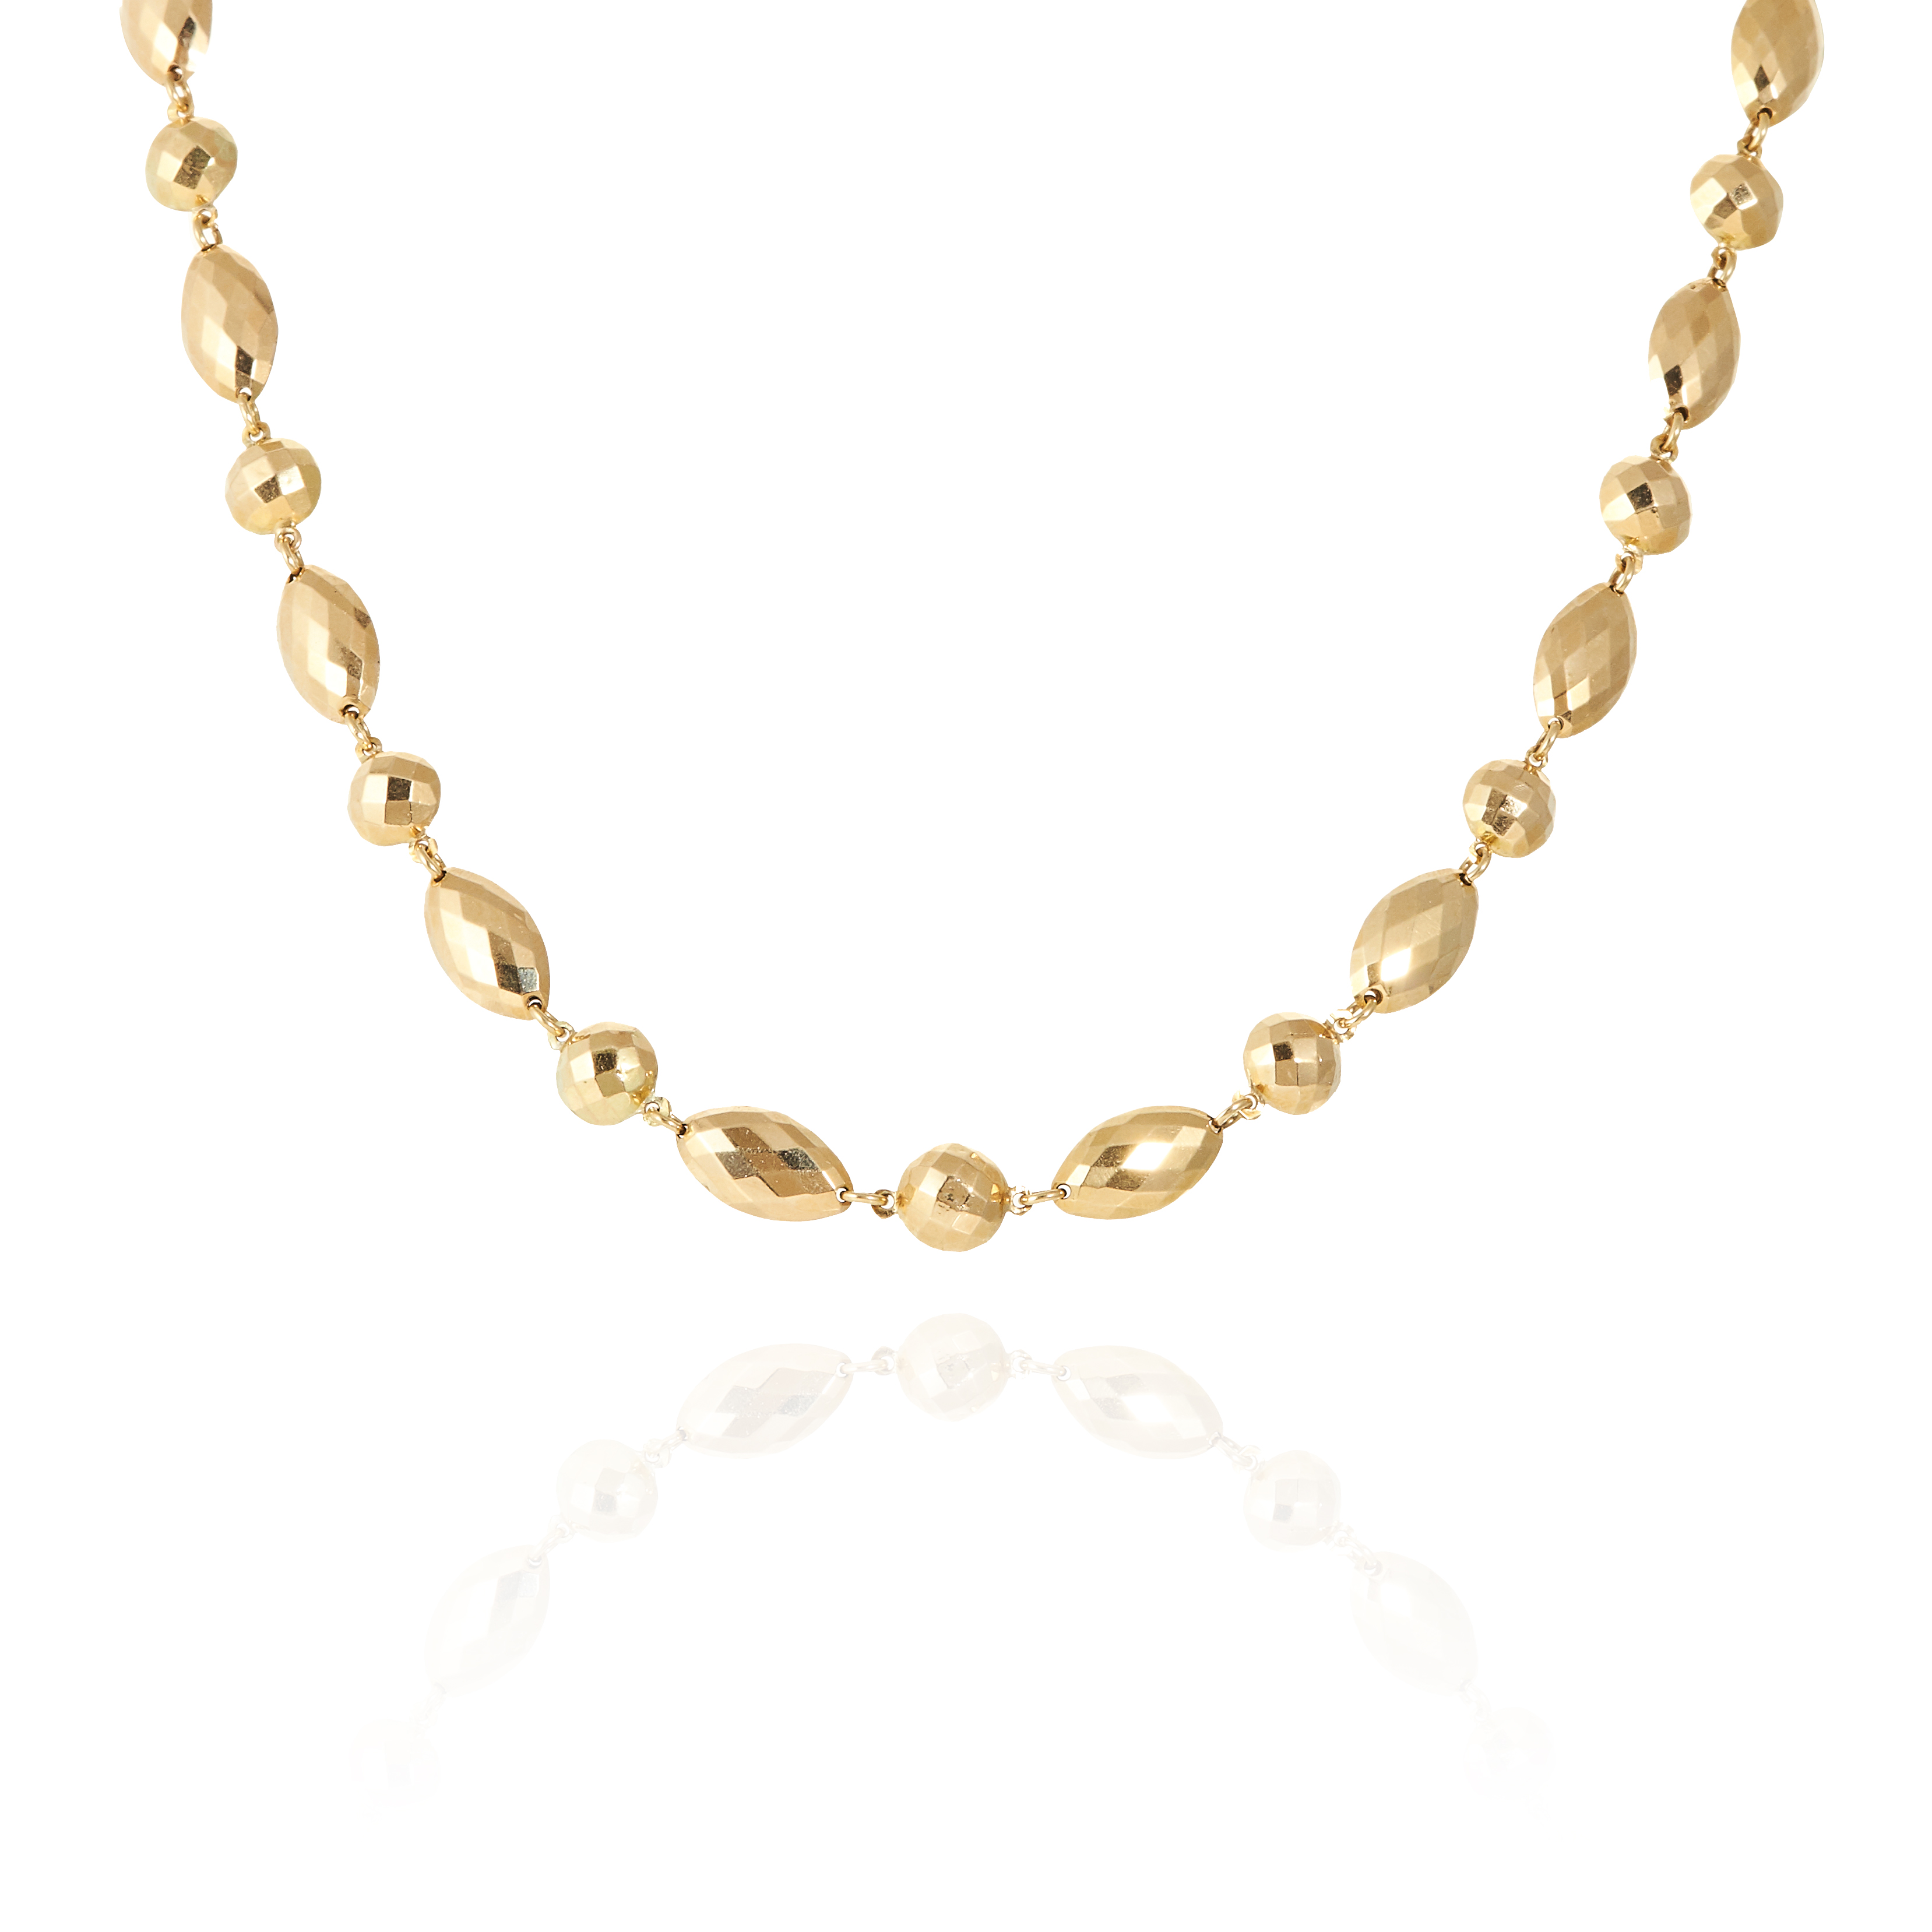 AN ANTIQUE GOLD FANCY LINK CHAIN in yellow gold, comprising of alternating circular and oval faceted